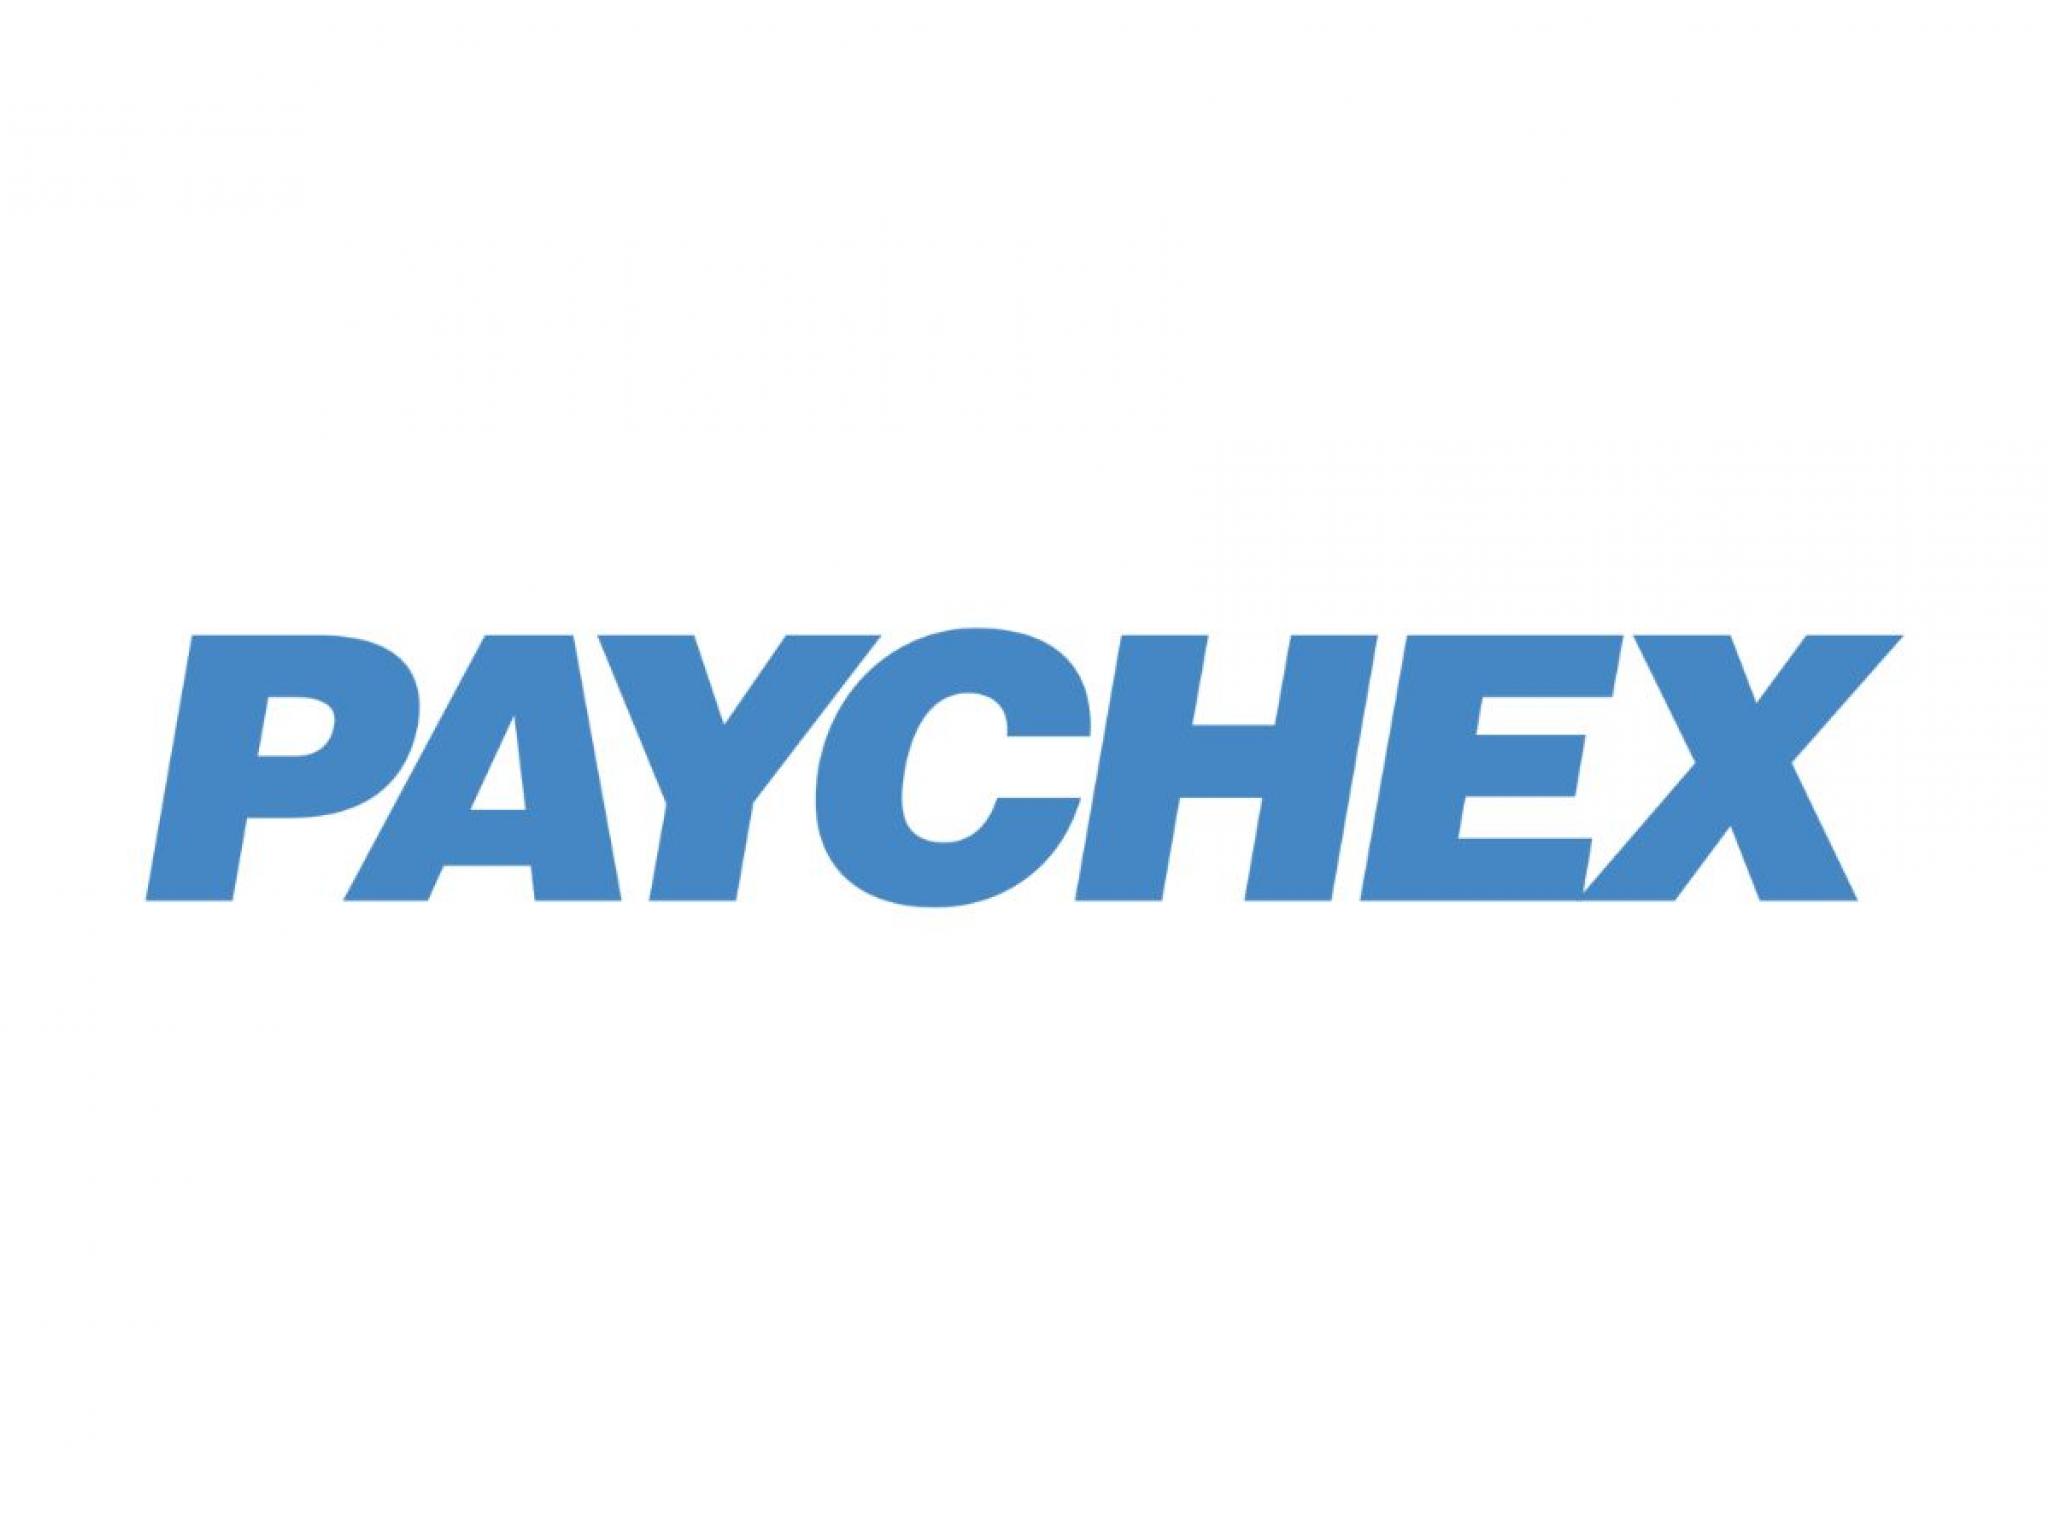  paychex-reports-downbeat-sales-joins-blackberry-and-other-big-stocks-moving-lower-on-thursday 